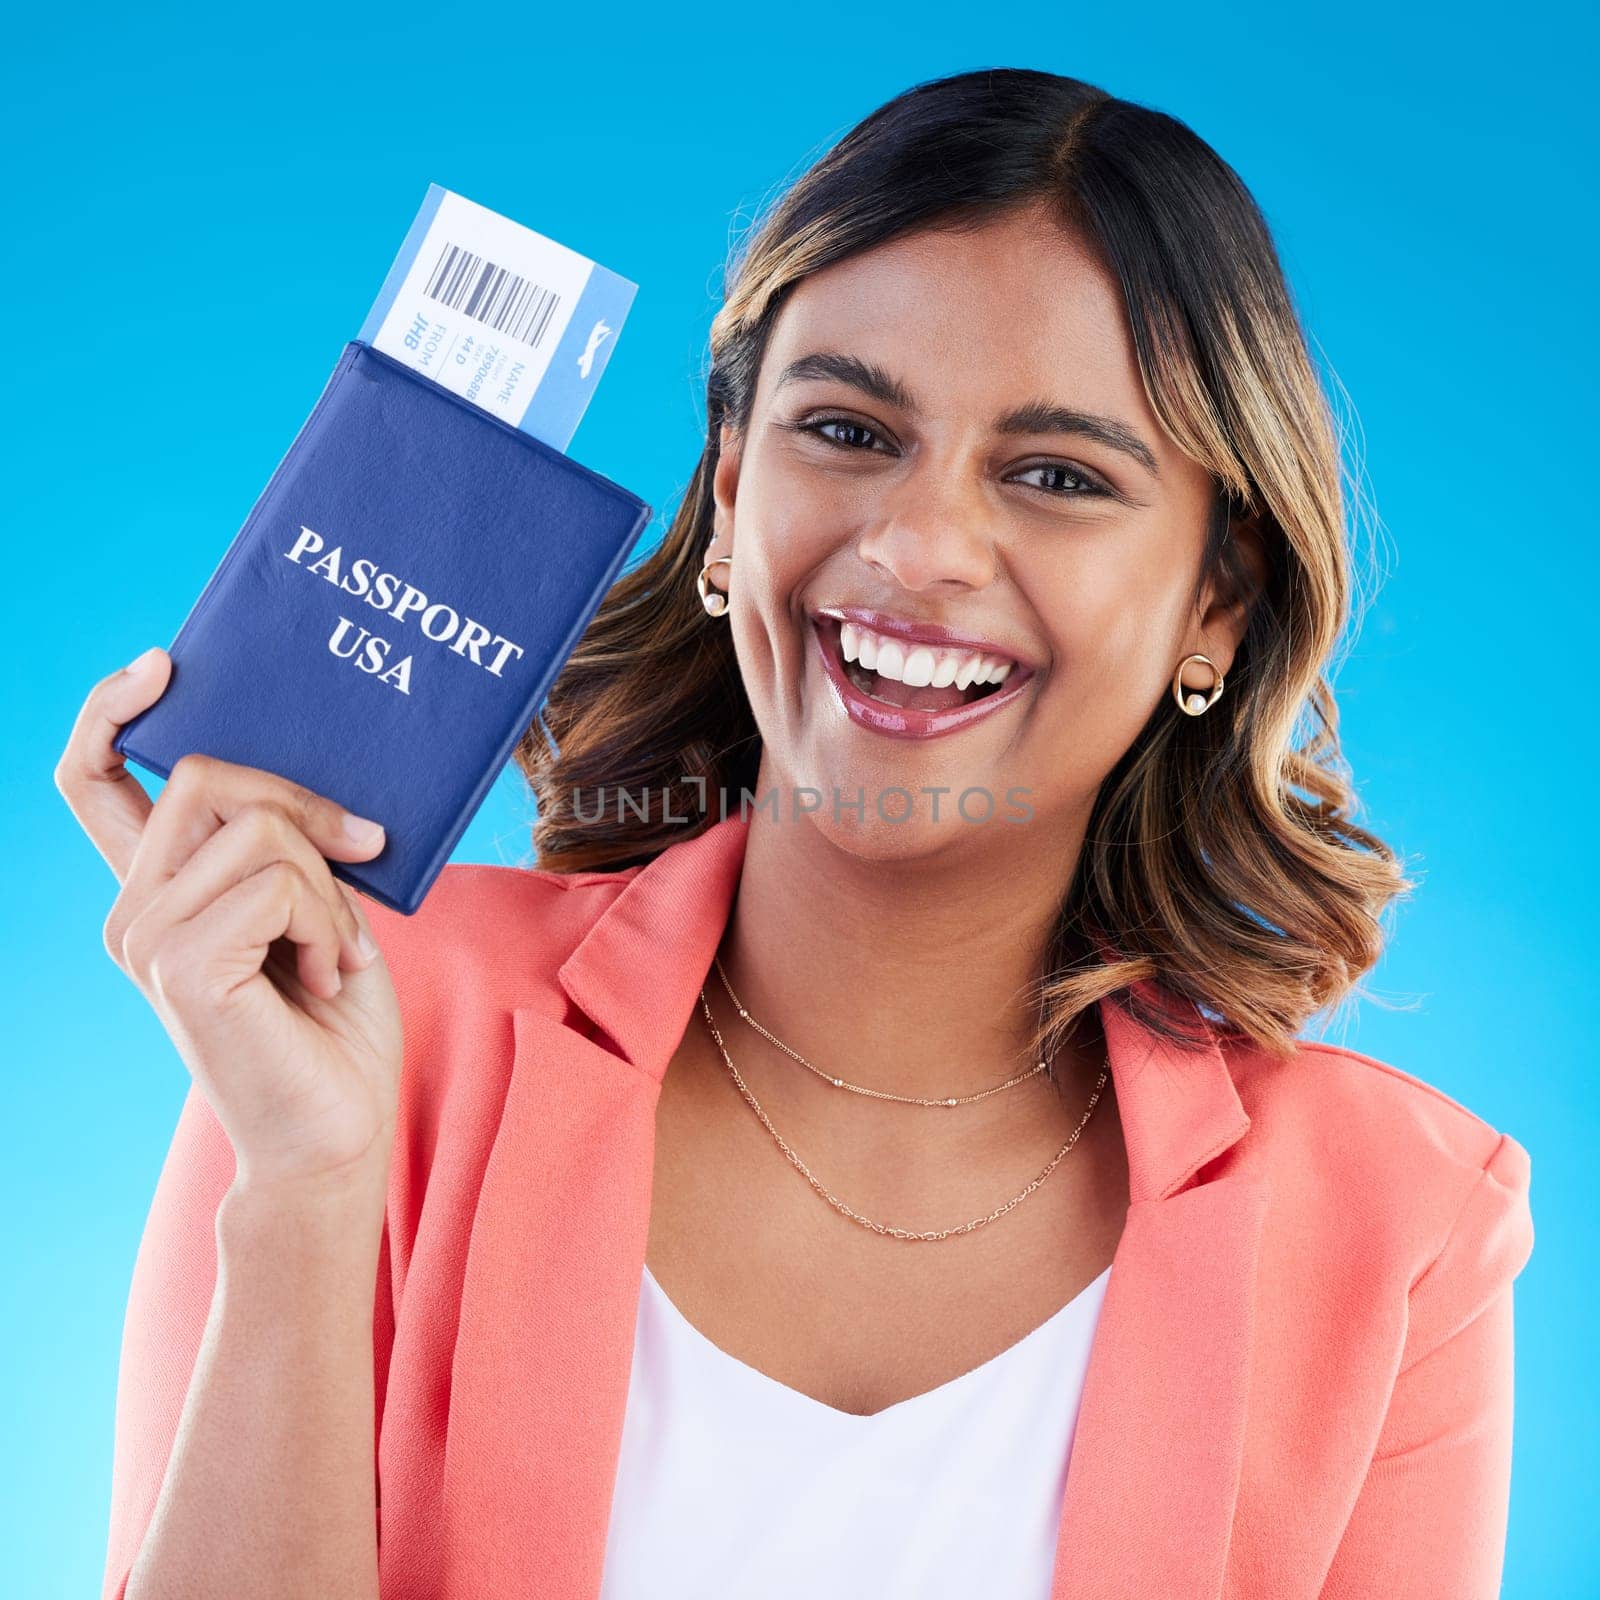 Passport, excited and woman portrait isolated on blue background for USA travel opportunity, immigration or holiday. Identity documents, flight ticket and happy face of young indian person in studio.